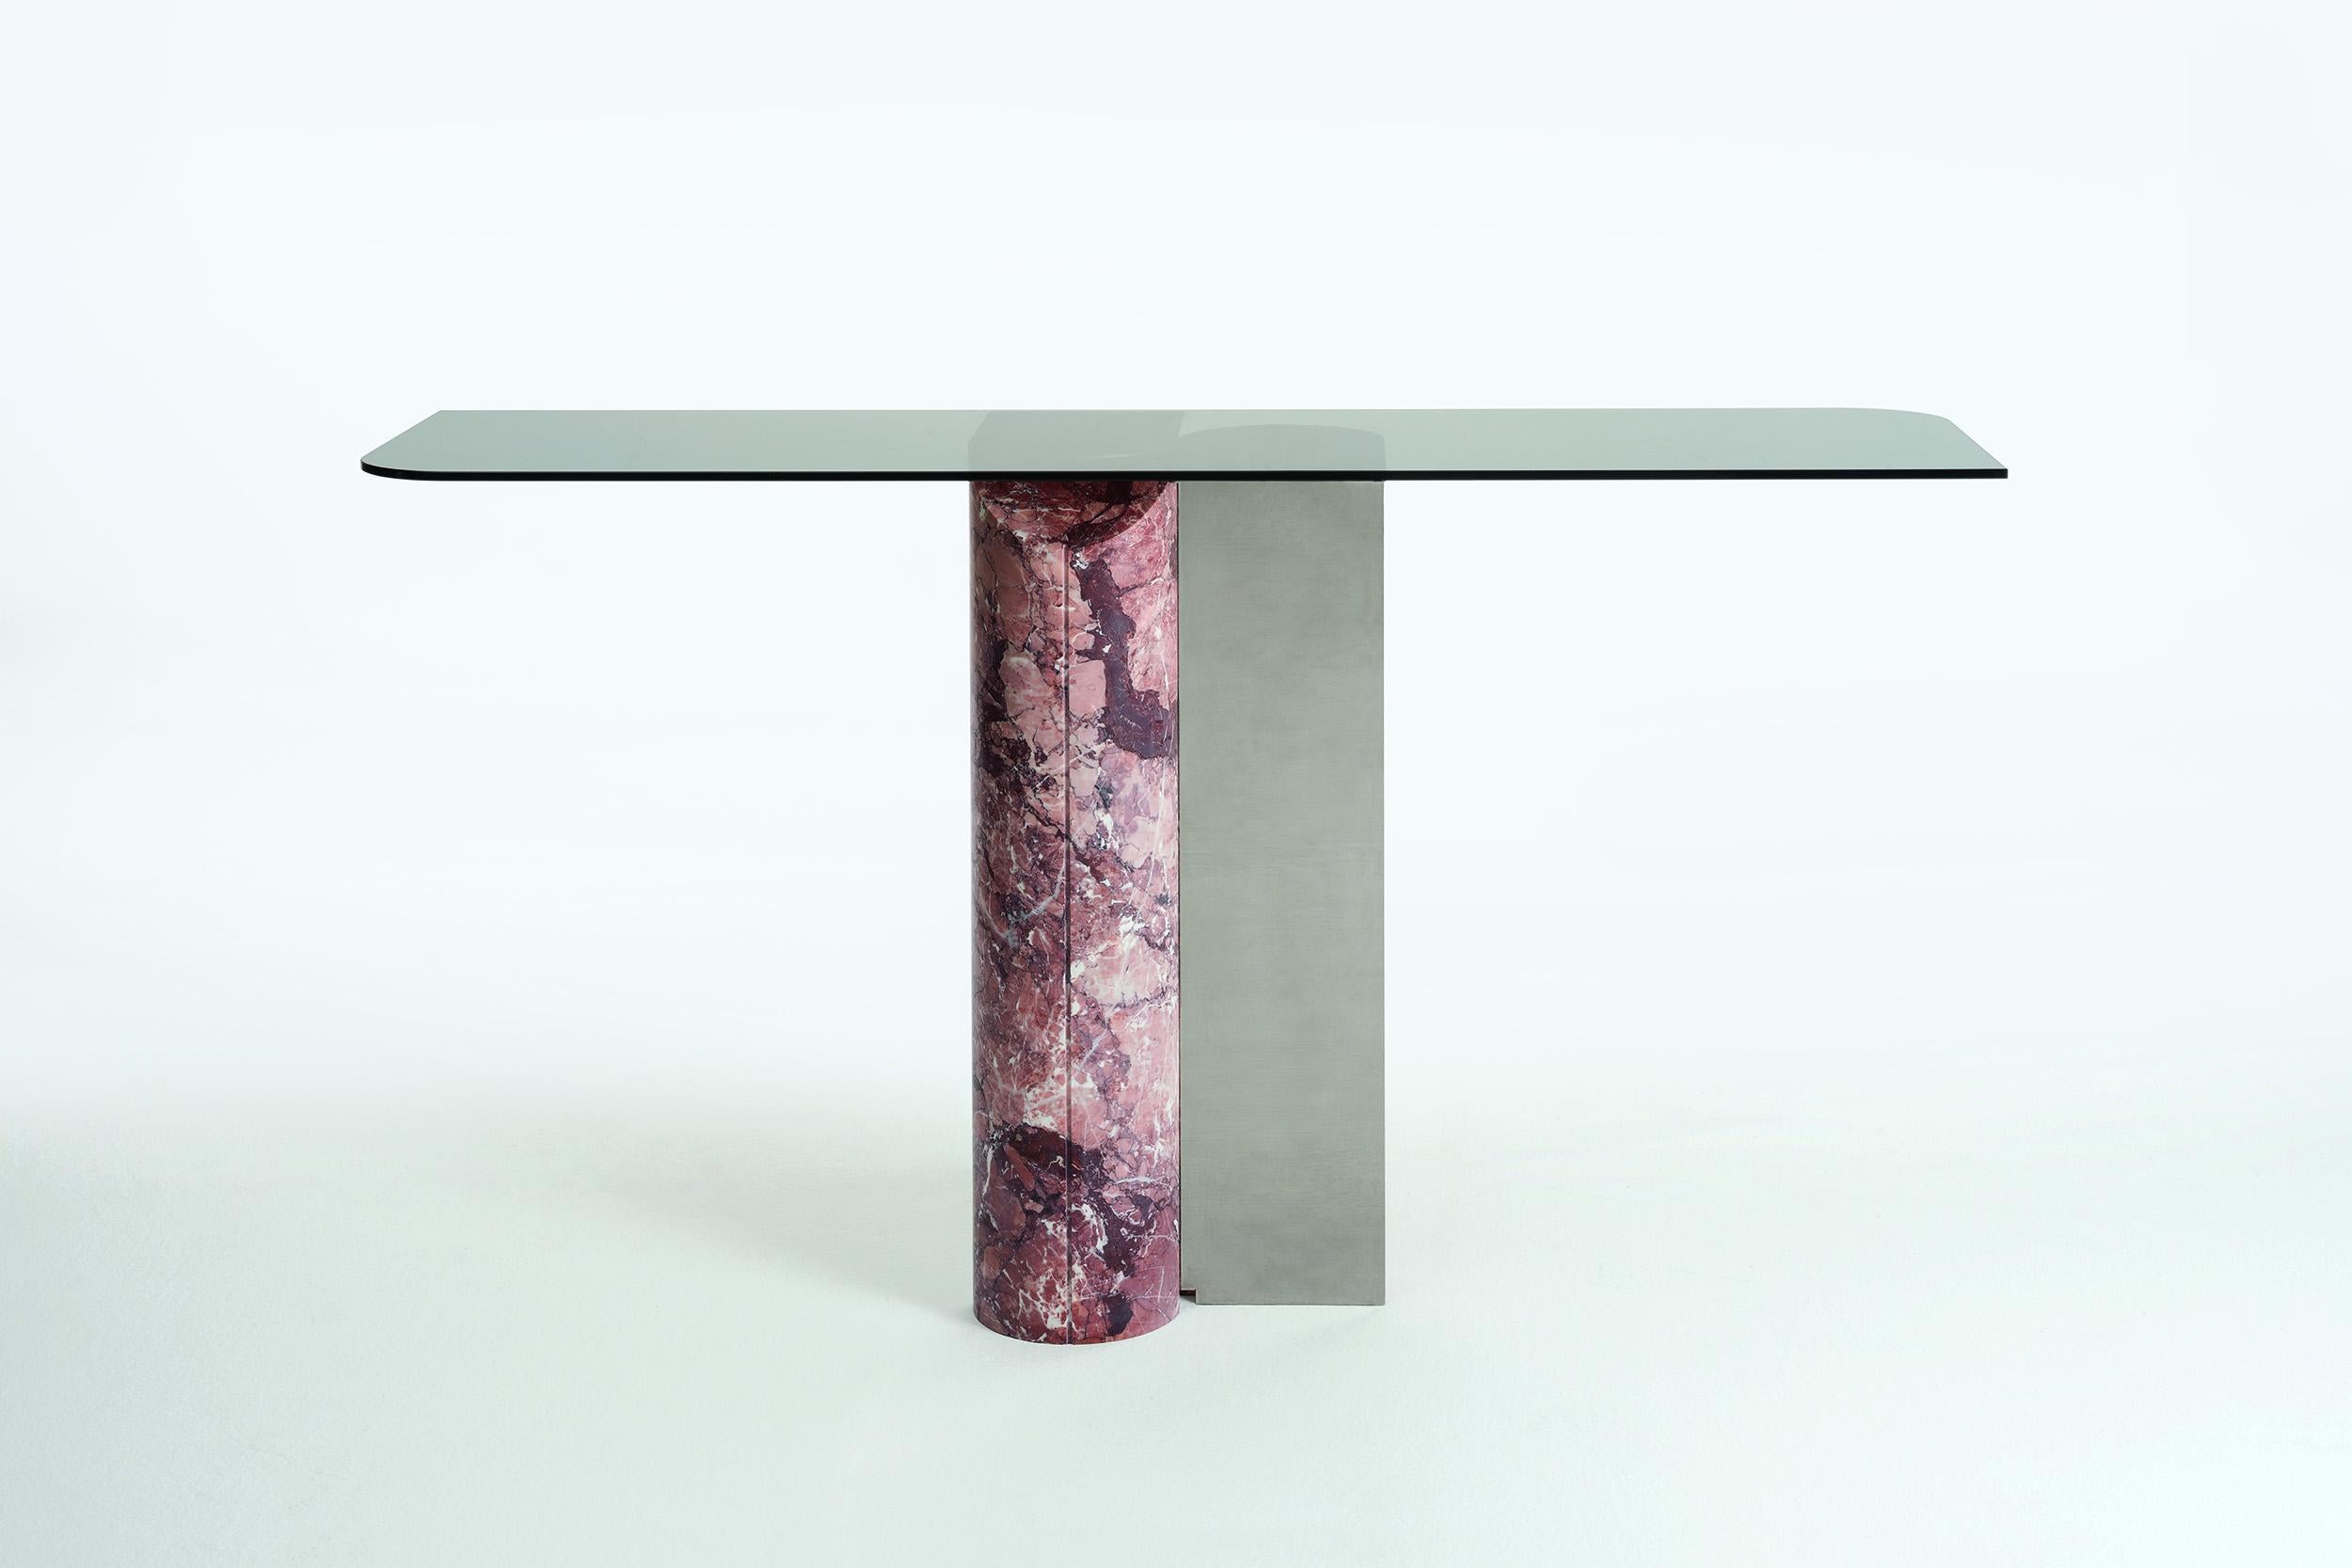 Cosmo Console by Andrea Bonini
Limited Edition
Dimensions: D 40 x W 150 x H 90 cm.
Materials: Steel, fumè glass and Rosso Francia marble.

Made in Italy. Limited series, numbered and signed pieces. Custom size or finish on request. Also available in